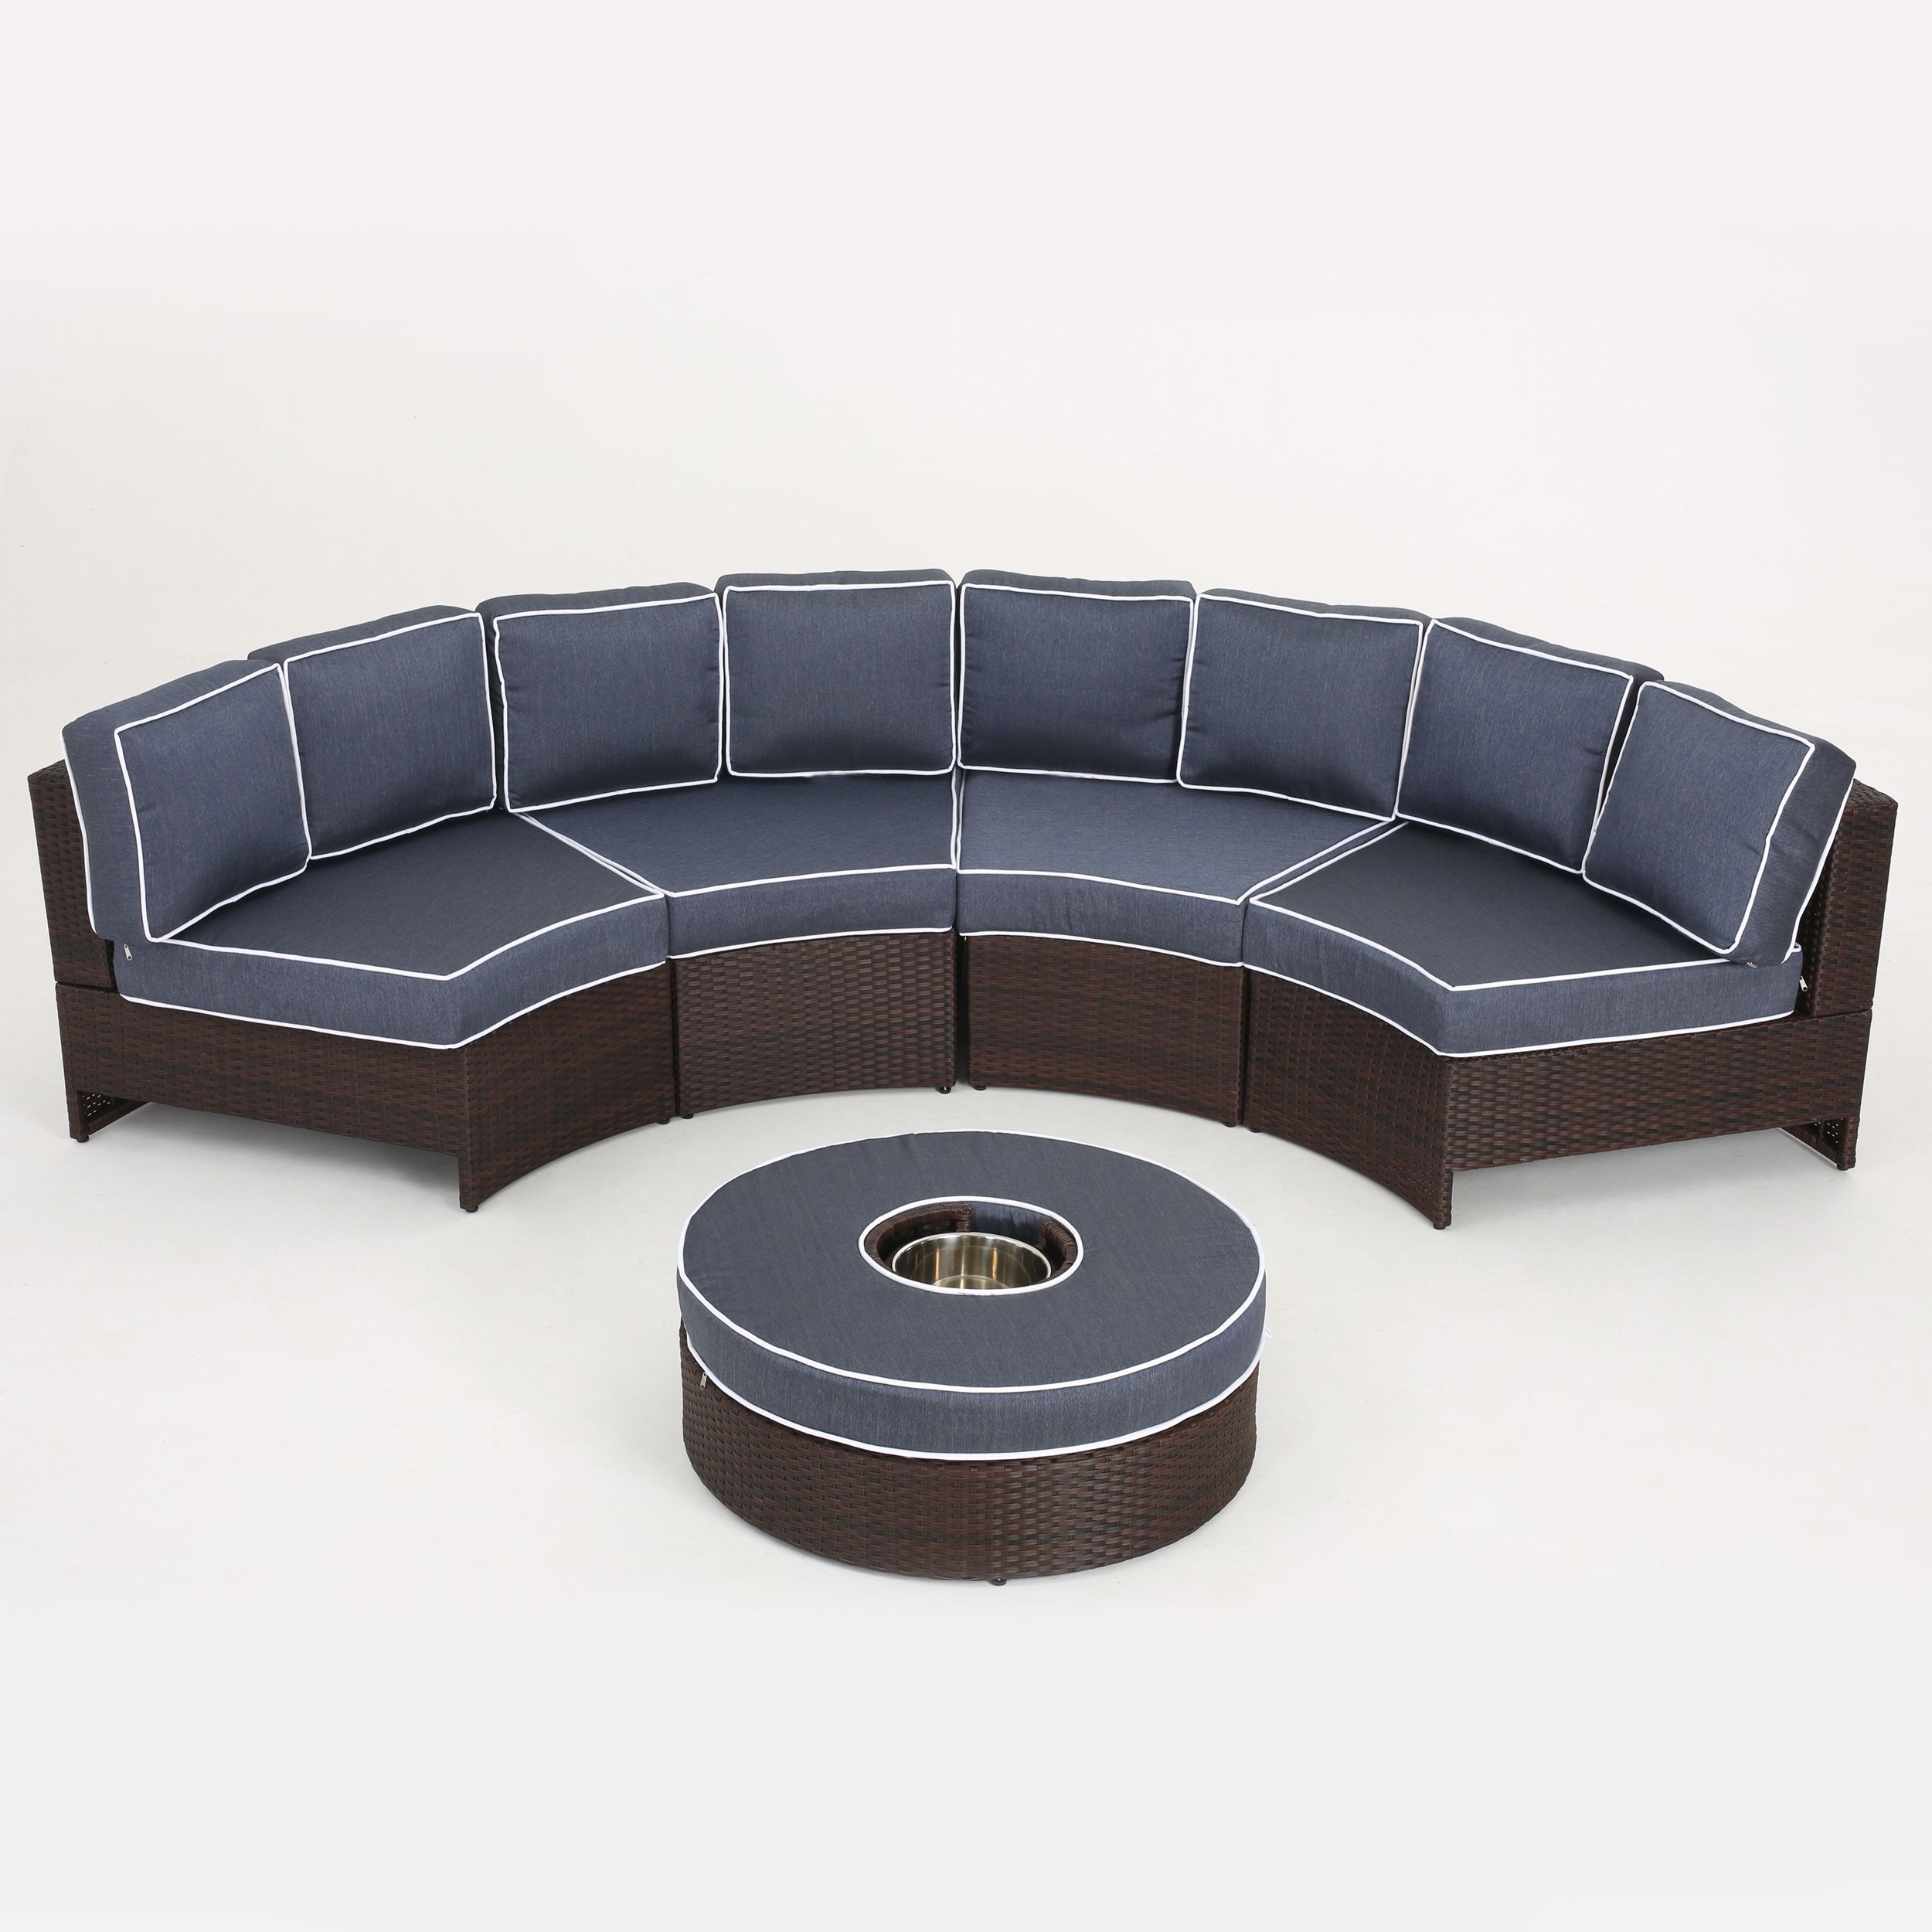 Navy Outdoor Seating Sectional Patio Sets In Recent Riviera Ponza Outdoor Wicker 5 Piece Semicircular Sectional Sofa (View 10 of 15)